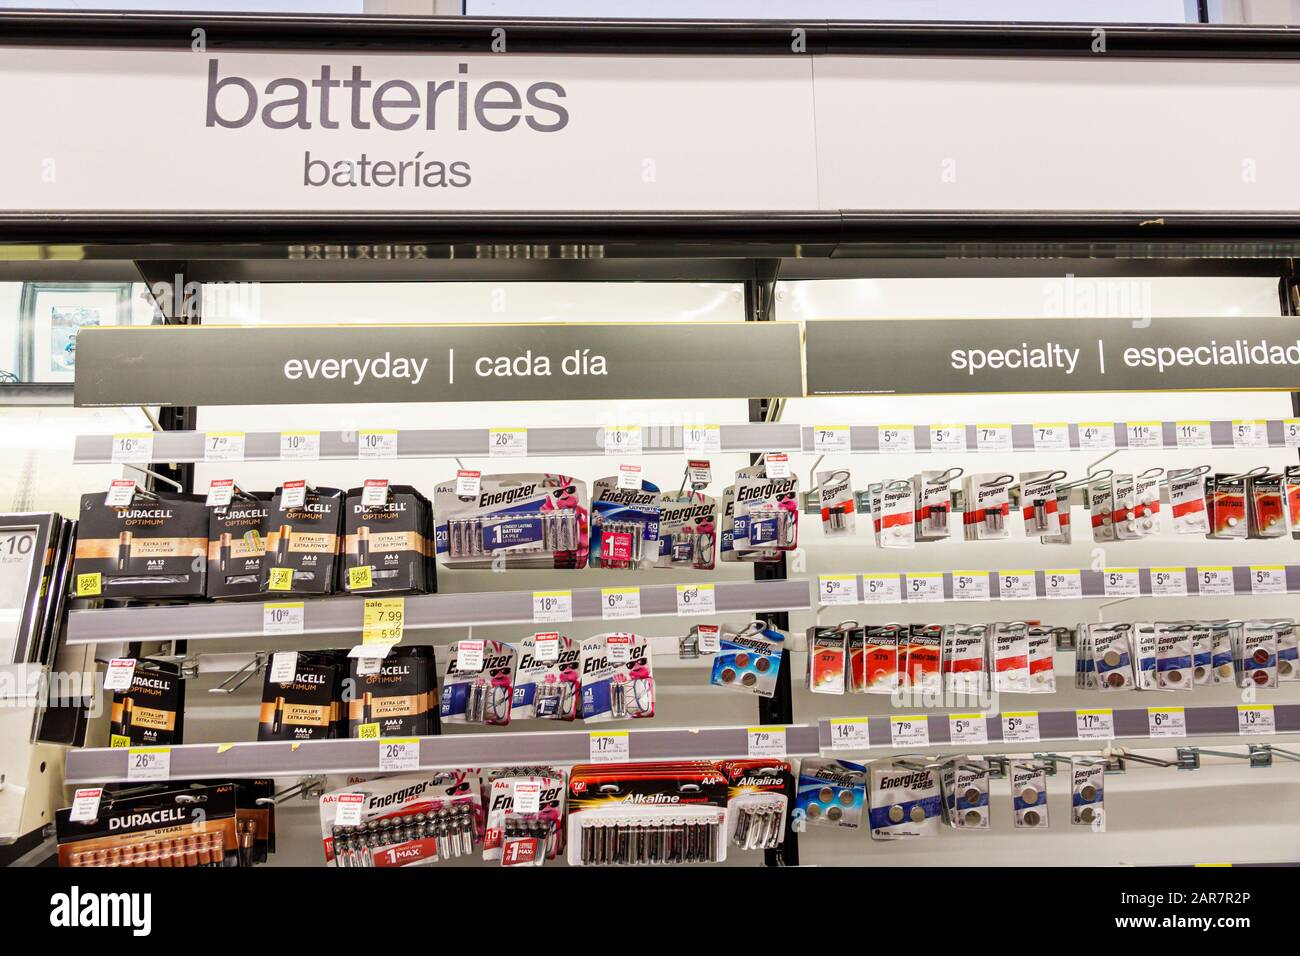 Energizer Batteries High Resolution Stock Photography and Images - Alamy